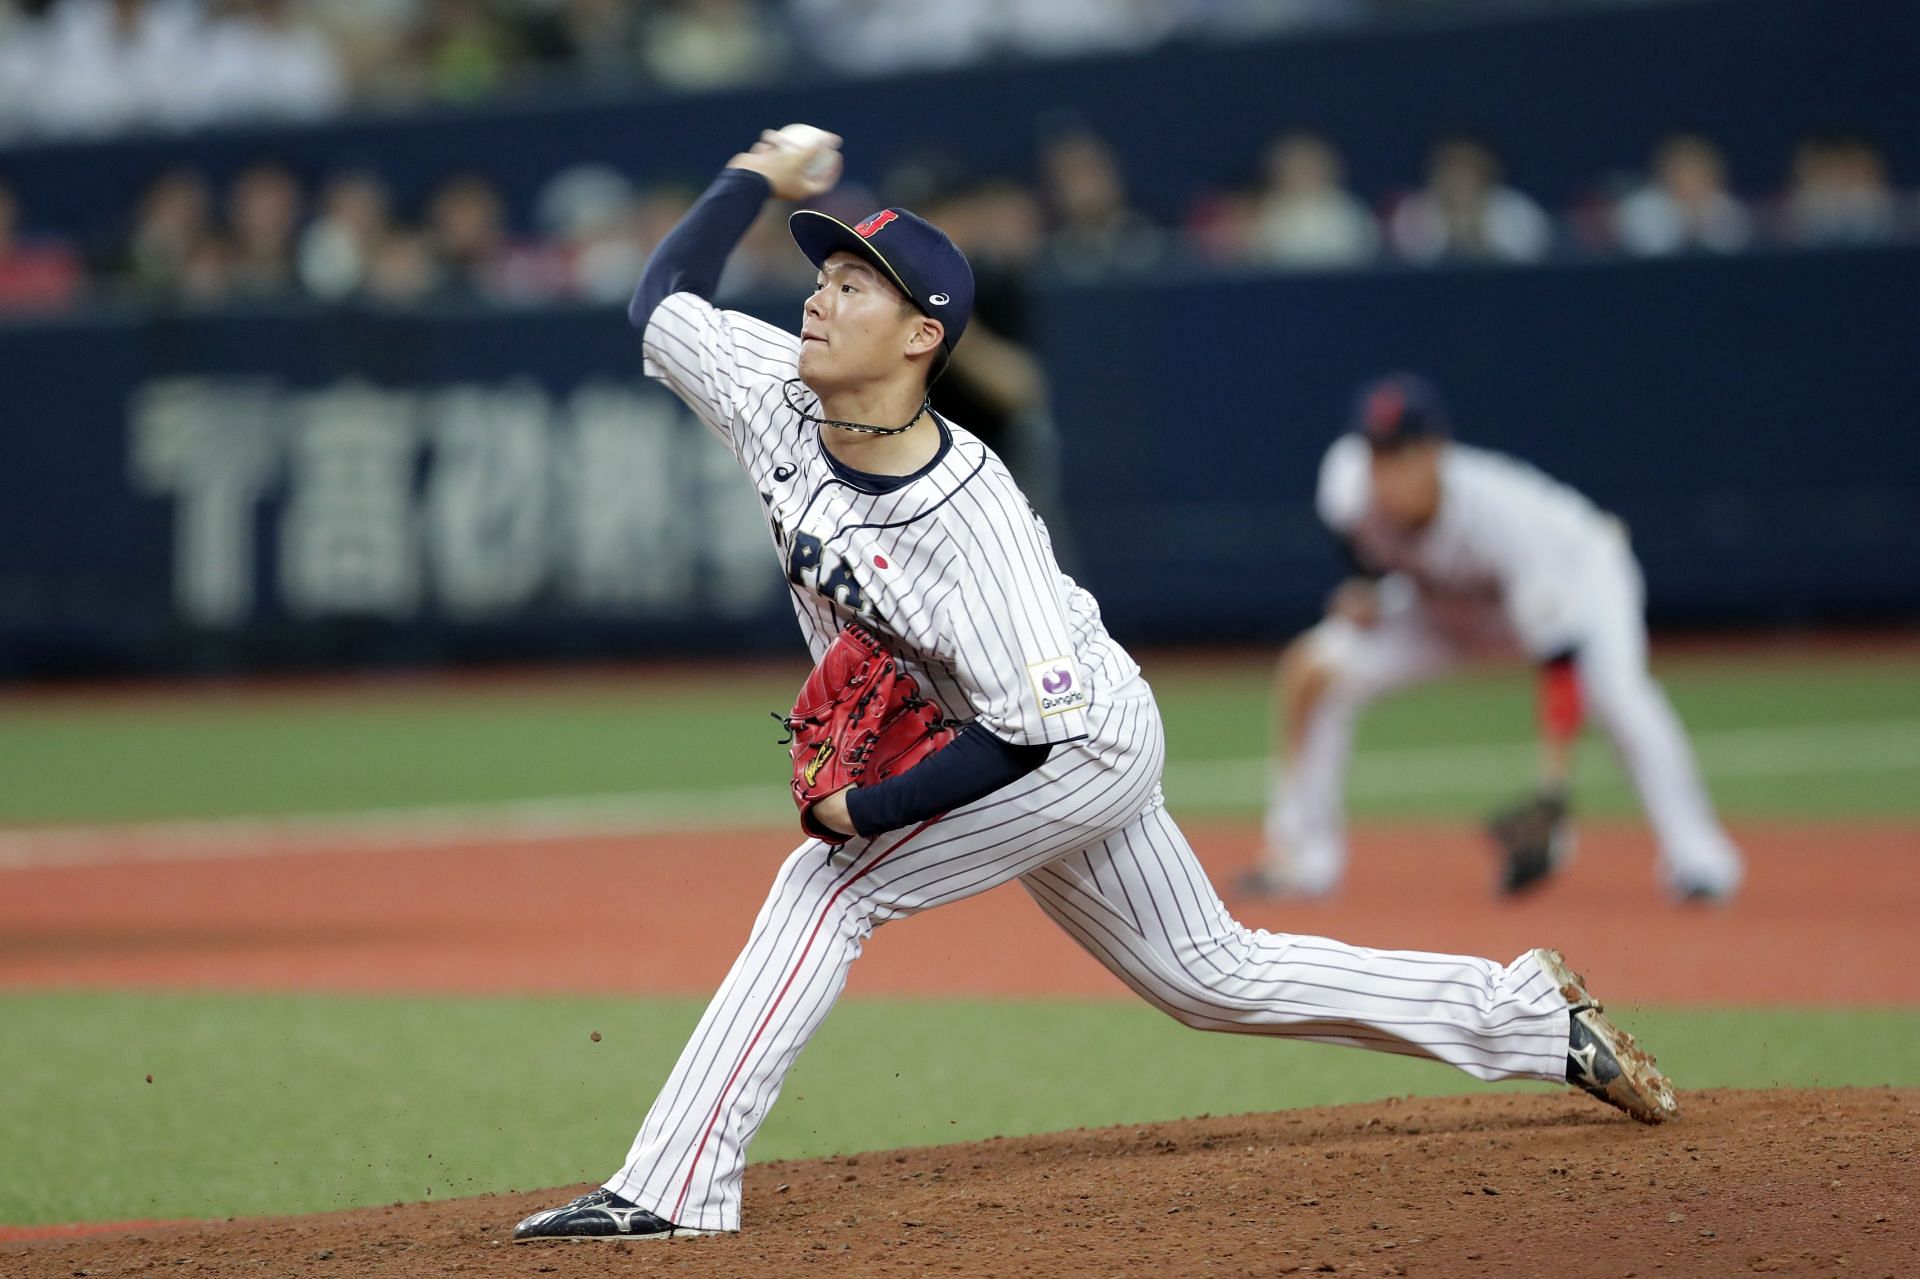 MLB fans excited with the possibility of Japanese pitcher Yoshinobu